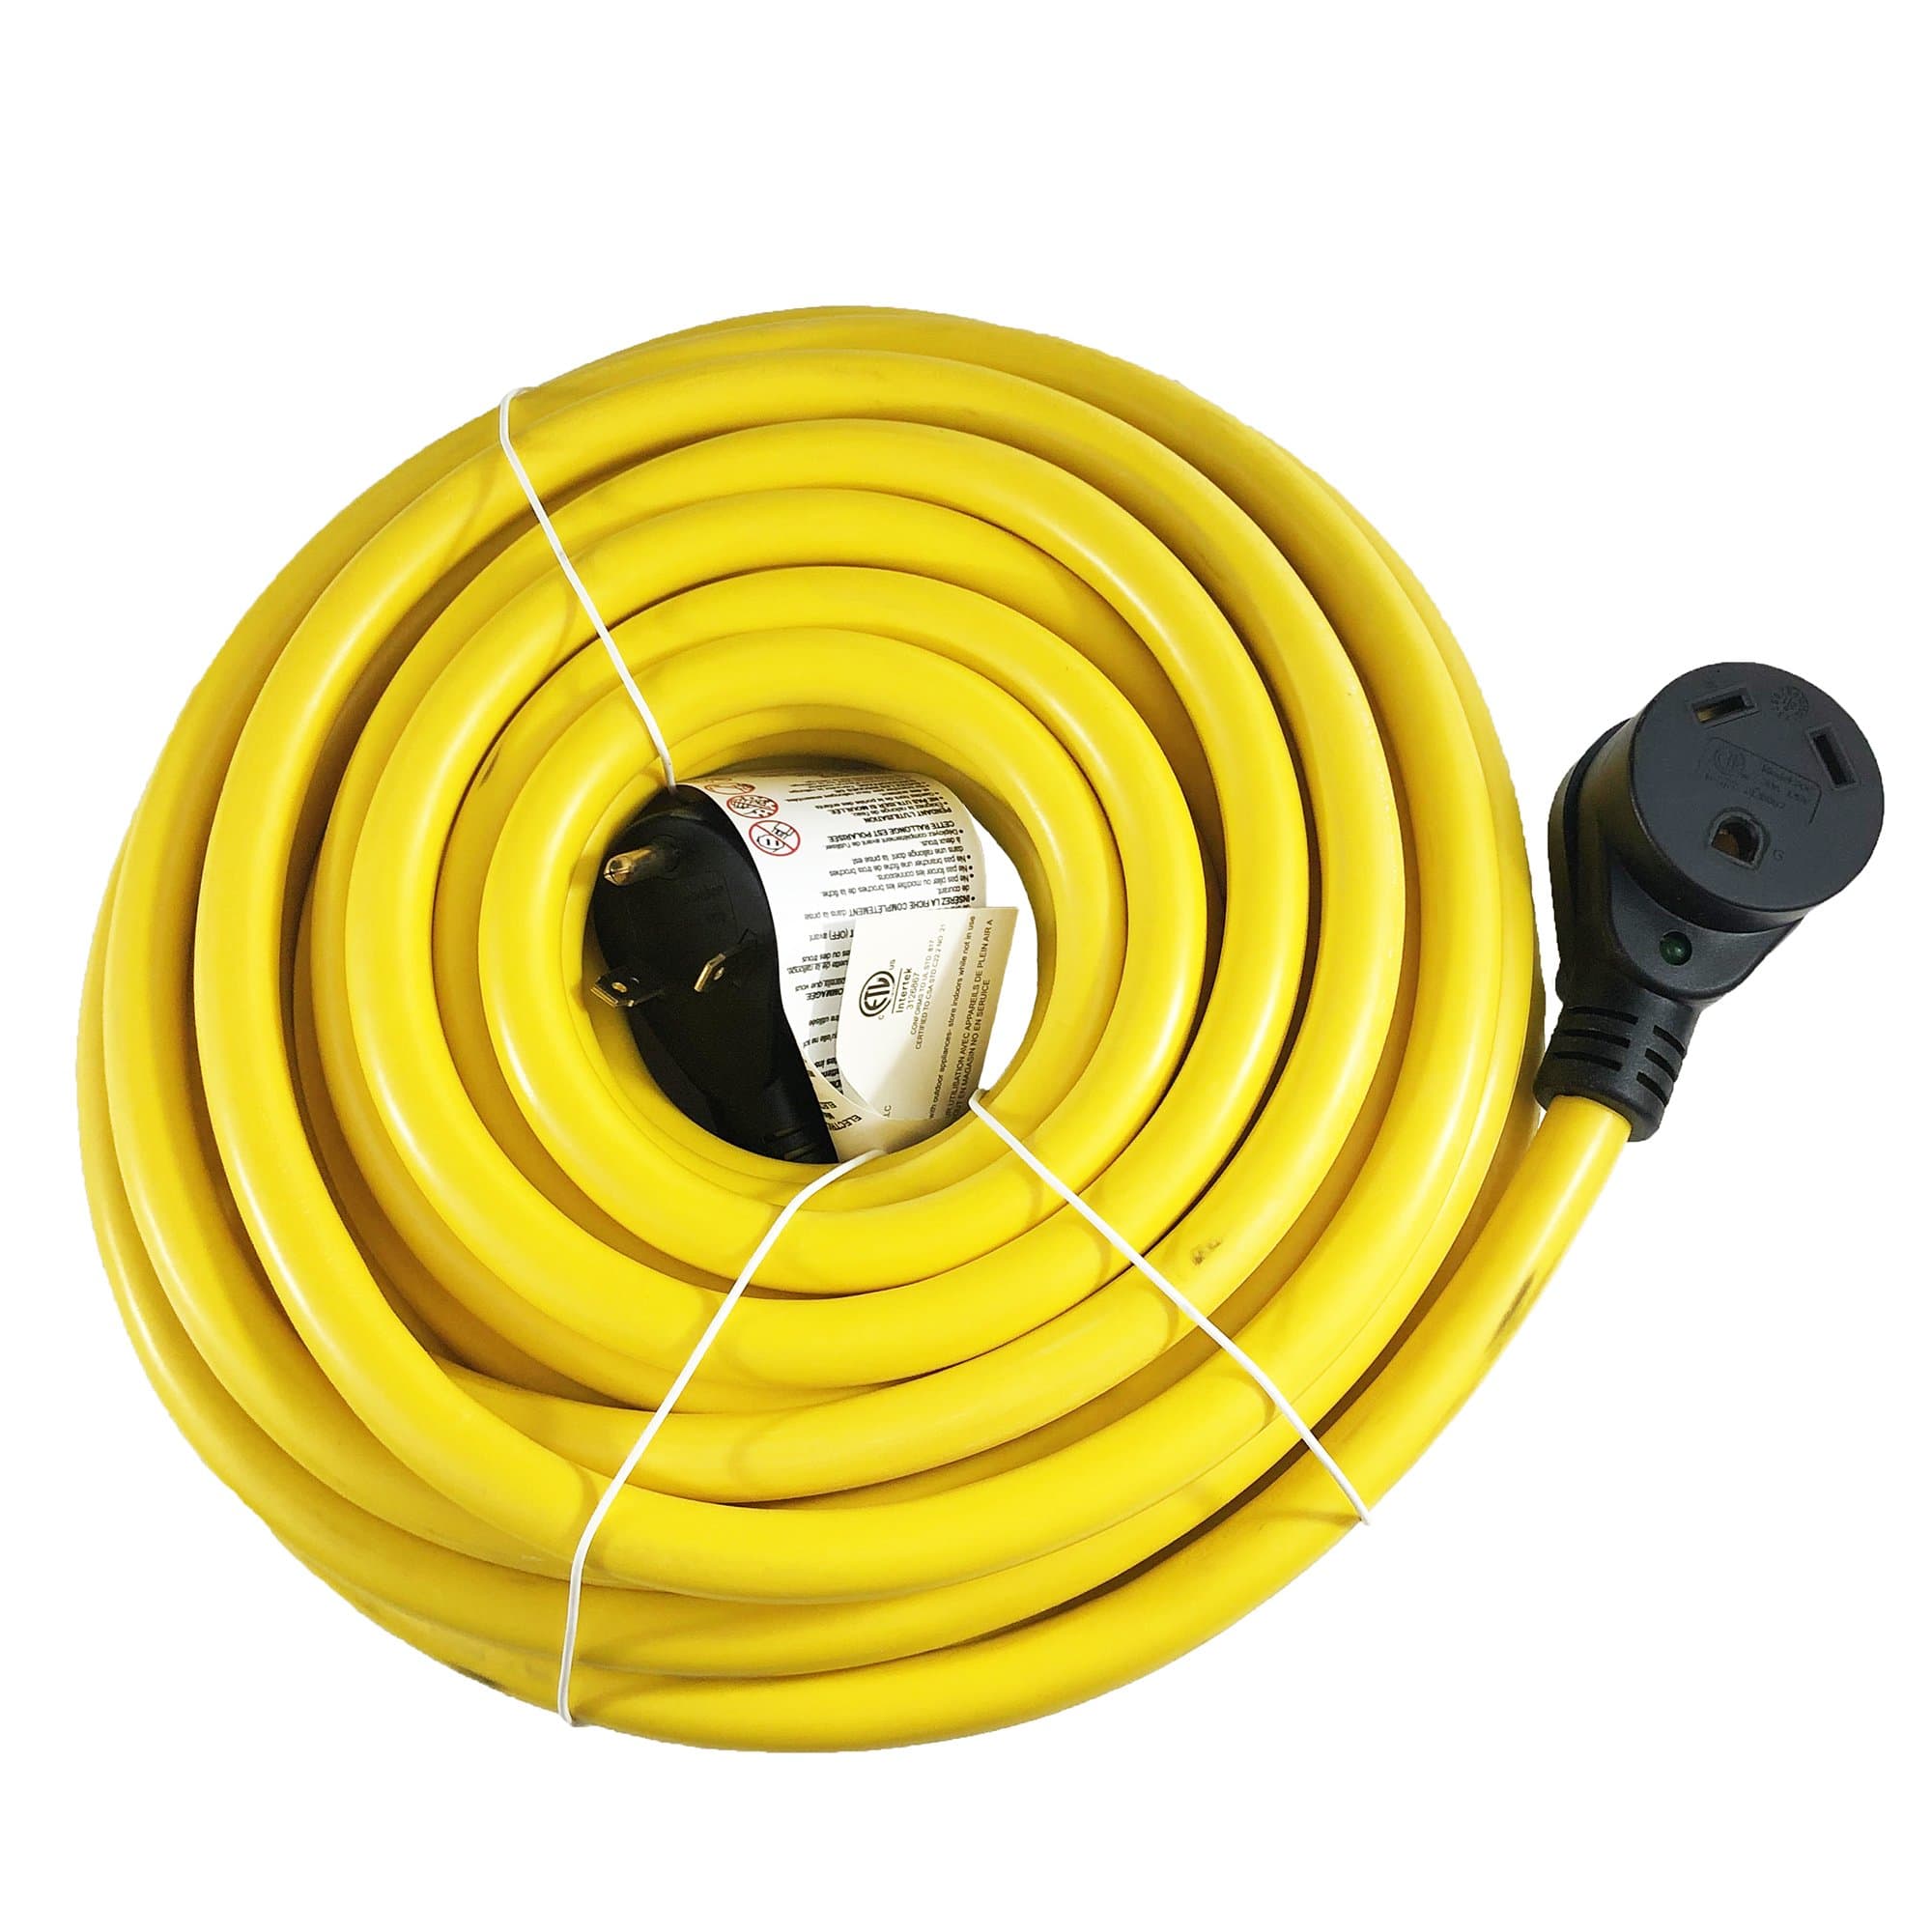 Power Products 30ARVE50 Weekender 30 Amp Extension Cord, Handle Grip, 50'